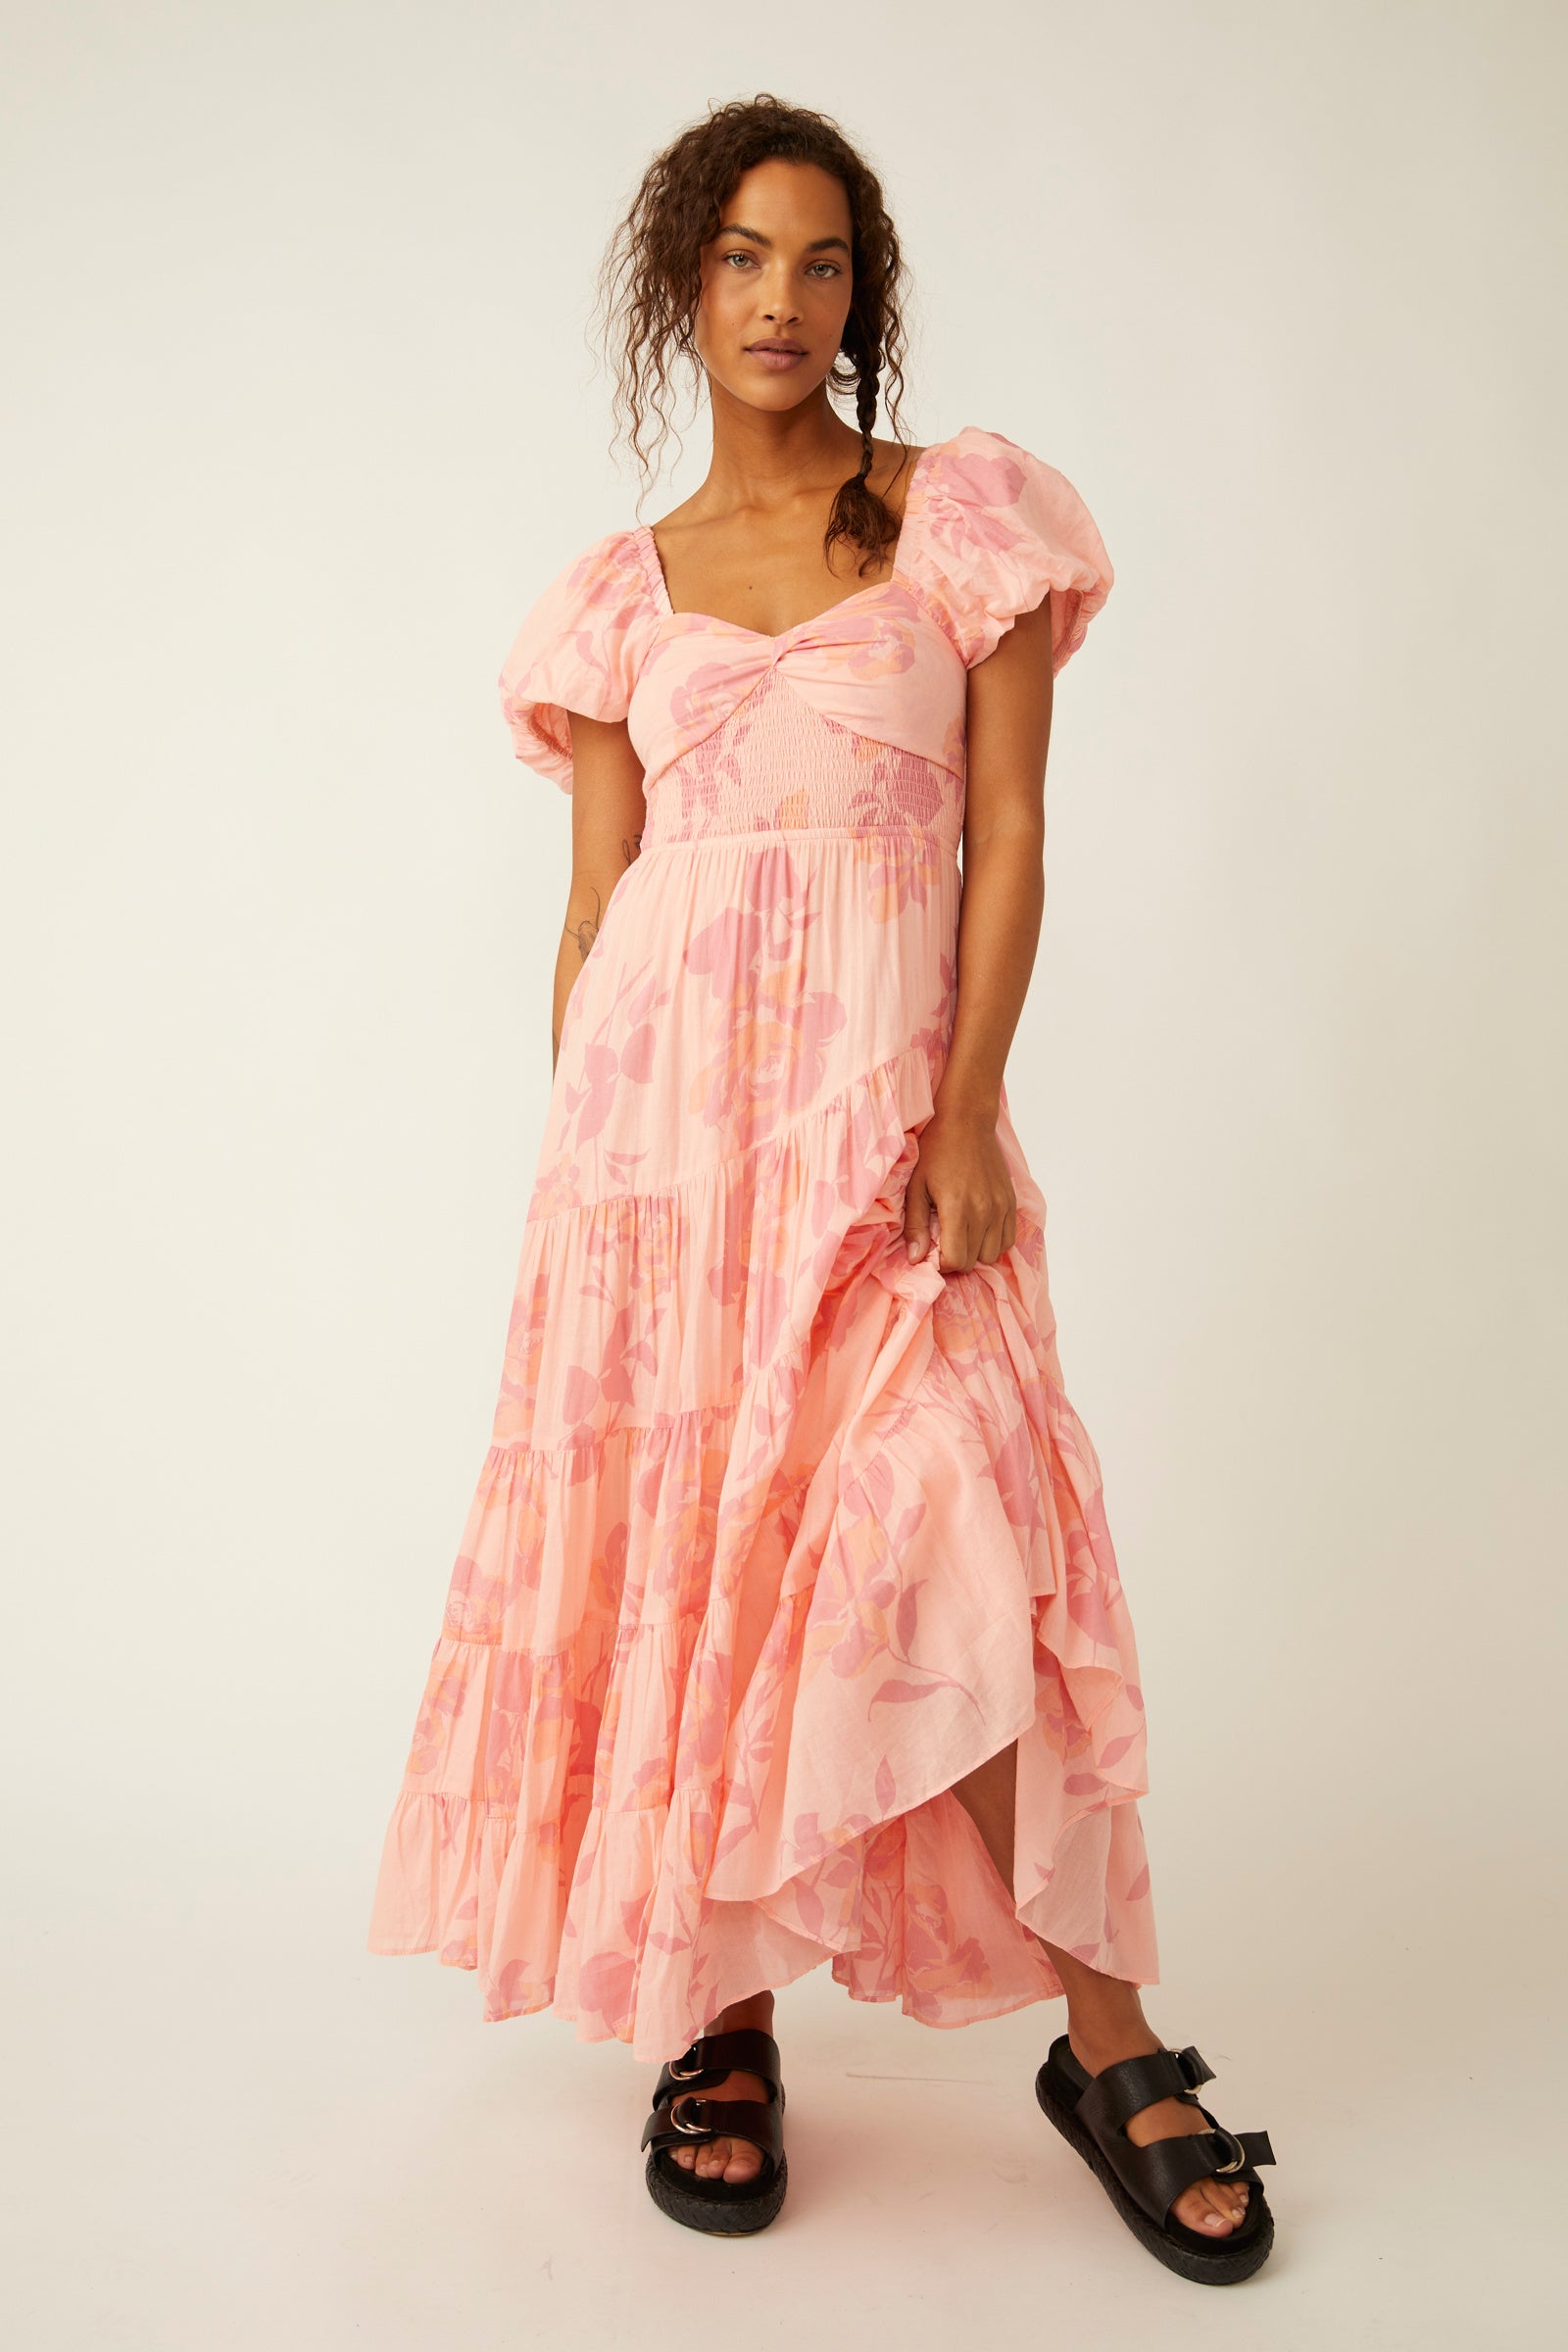 FREE PEOPLE-"SUNDRENCHED" DRESS